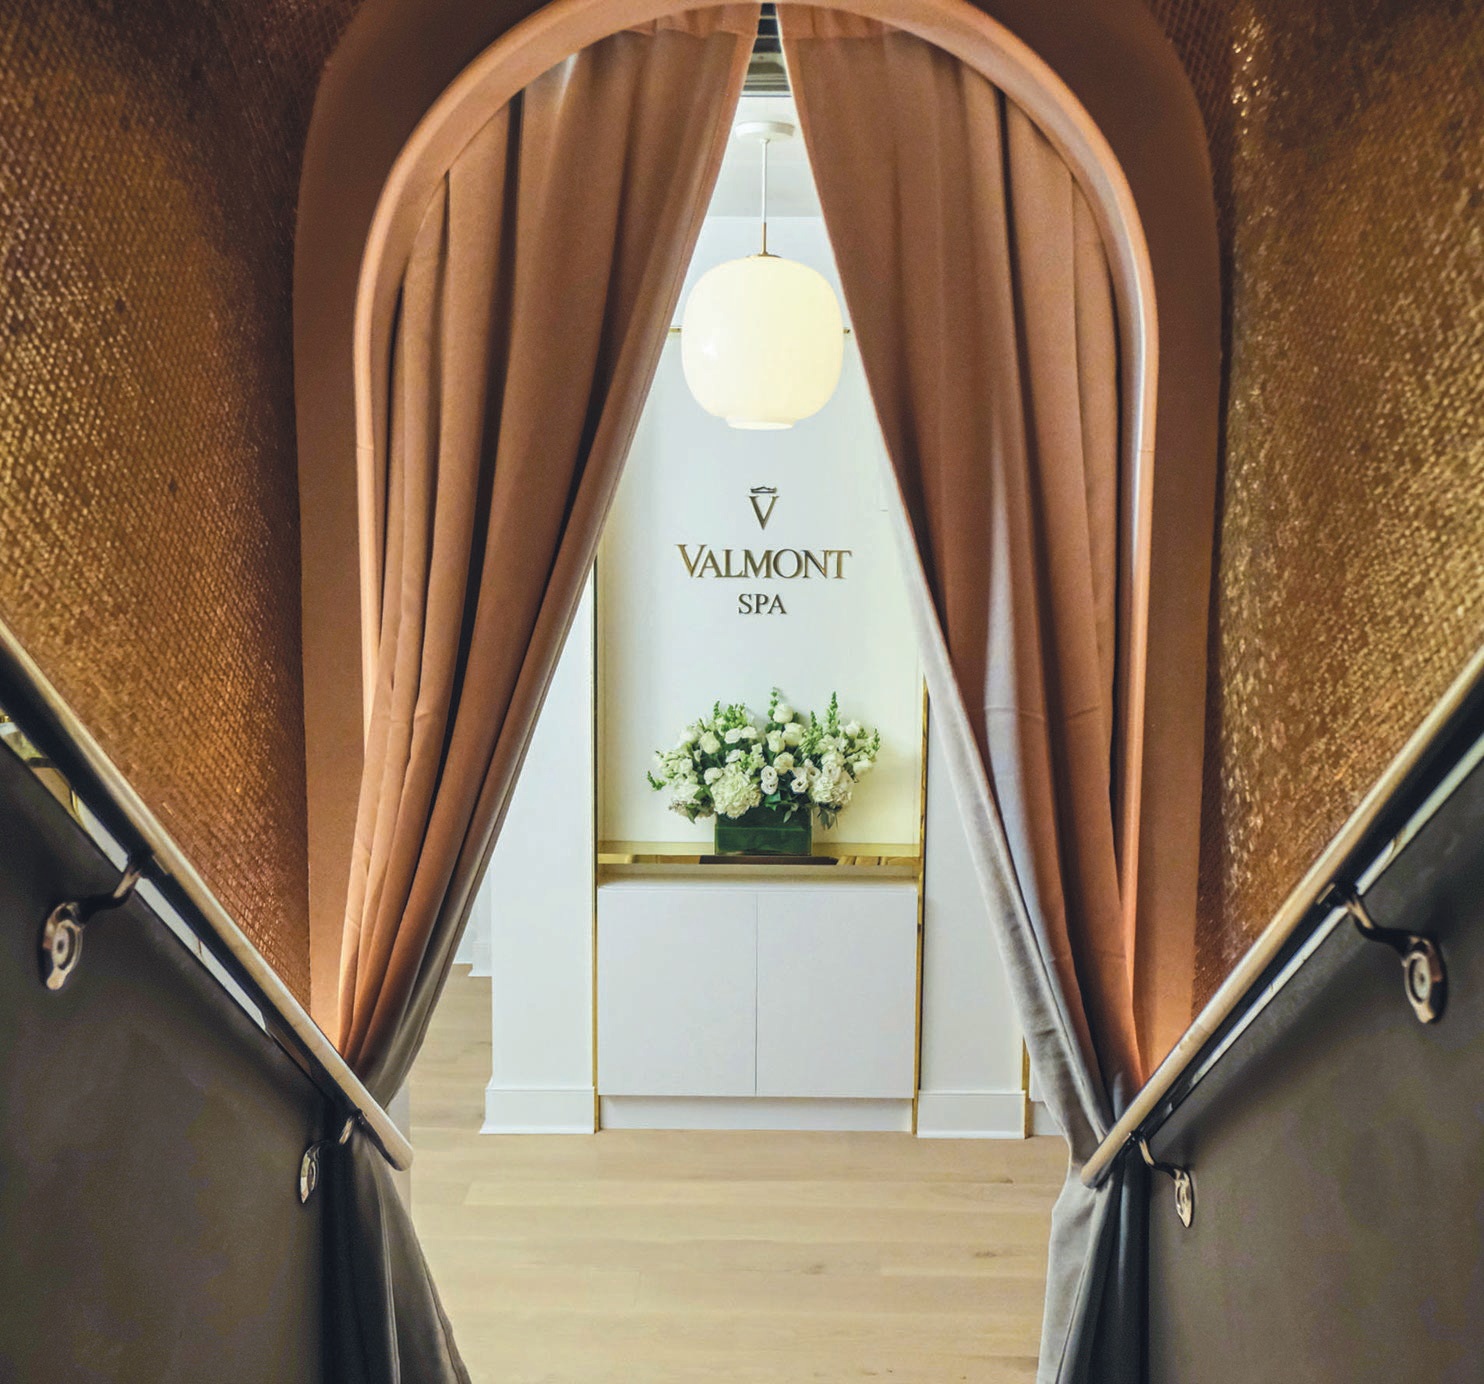 The newly unveiled Valmont Spa at The Carlyle is located on the third floor of the hotel, next to the posh Yves Durif Salon, where guests can enjoy the Swiss skincare brand’s innovative treatments. PHOTO COURTESY OF BRAND